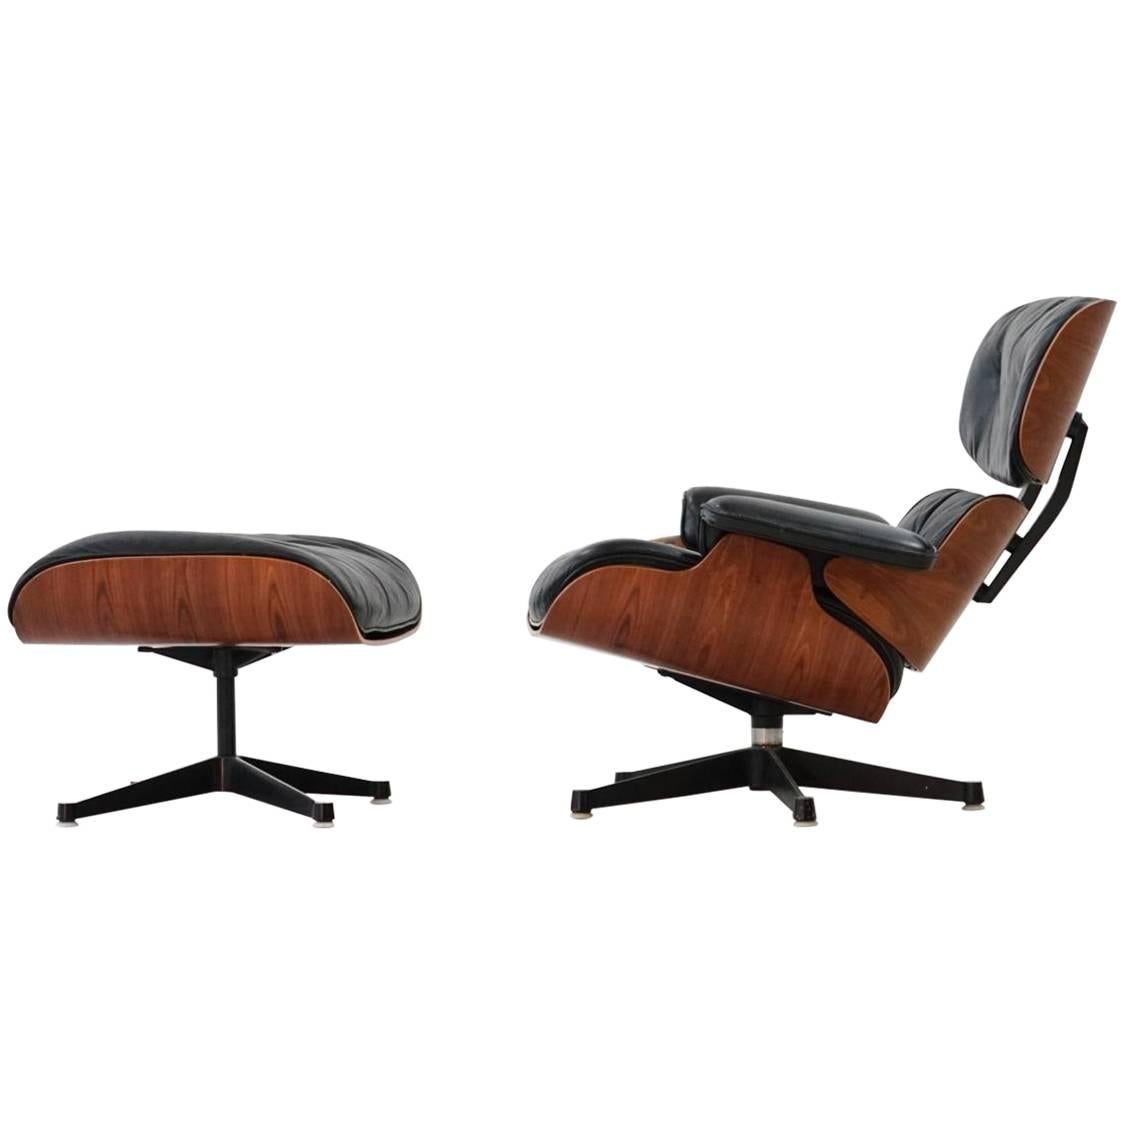 Original Lounge Chair and Ottoman by Charles Eames Herman Miller, Rosewood